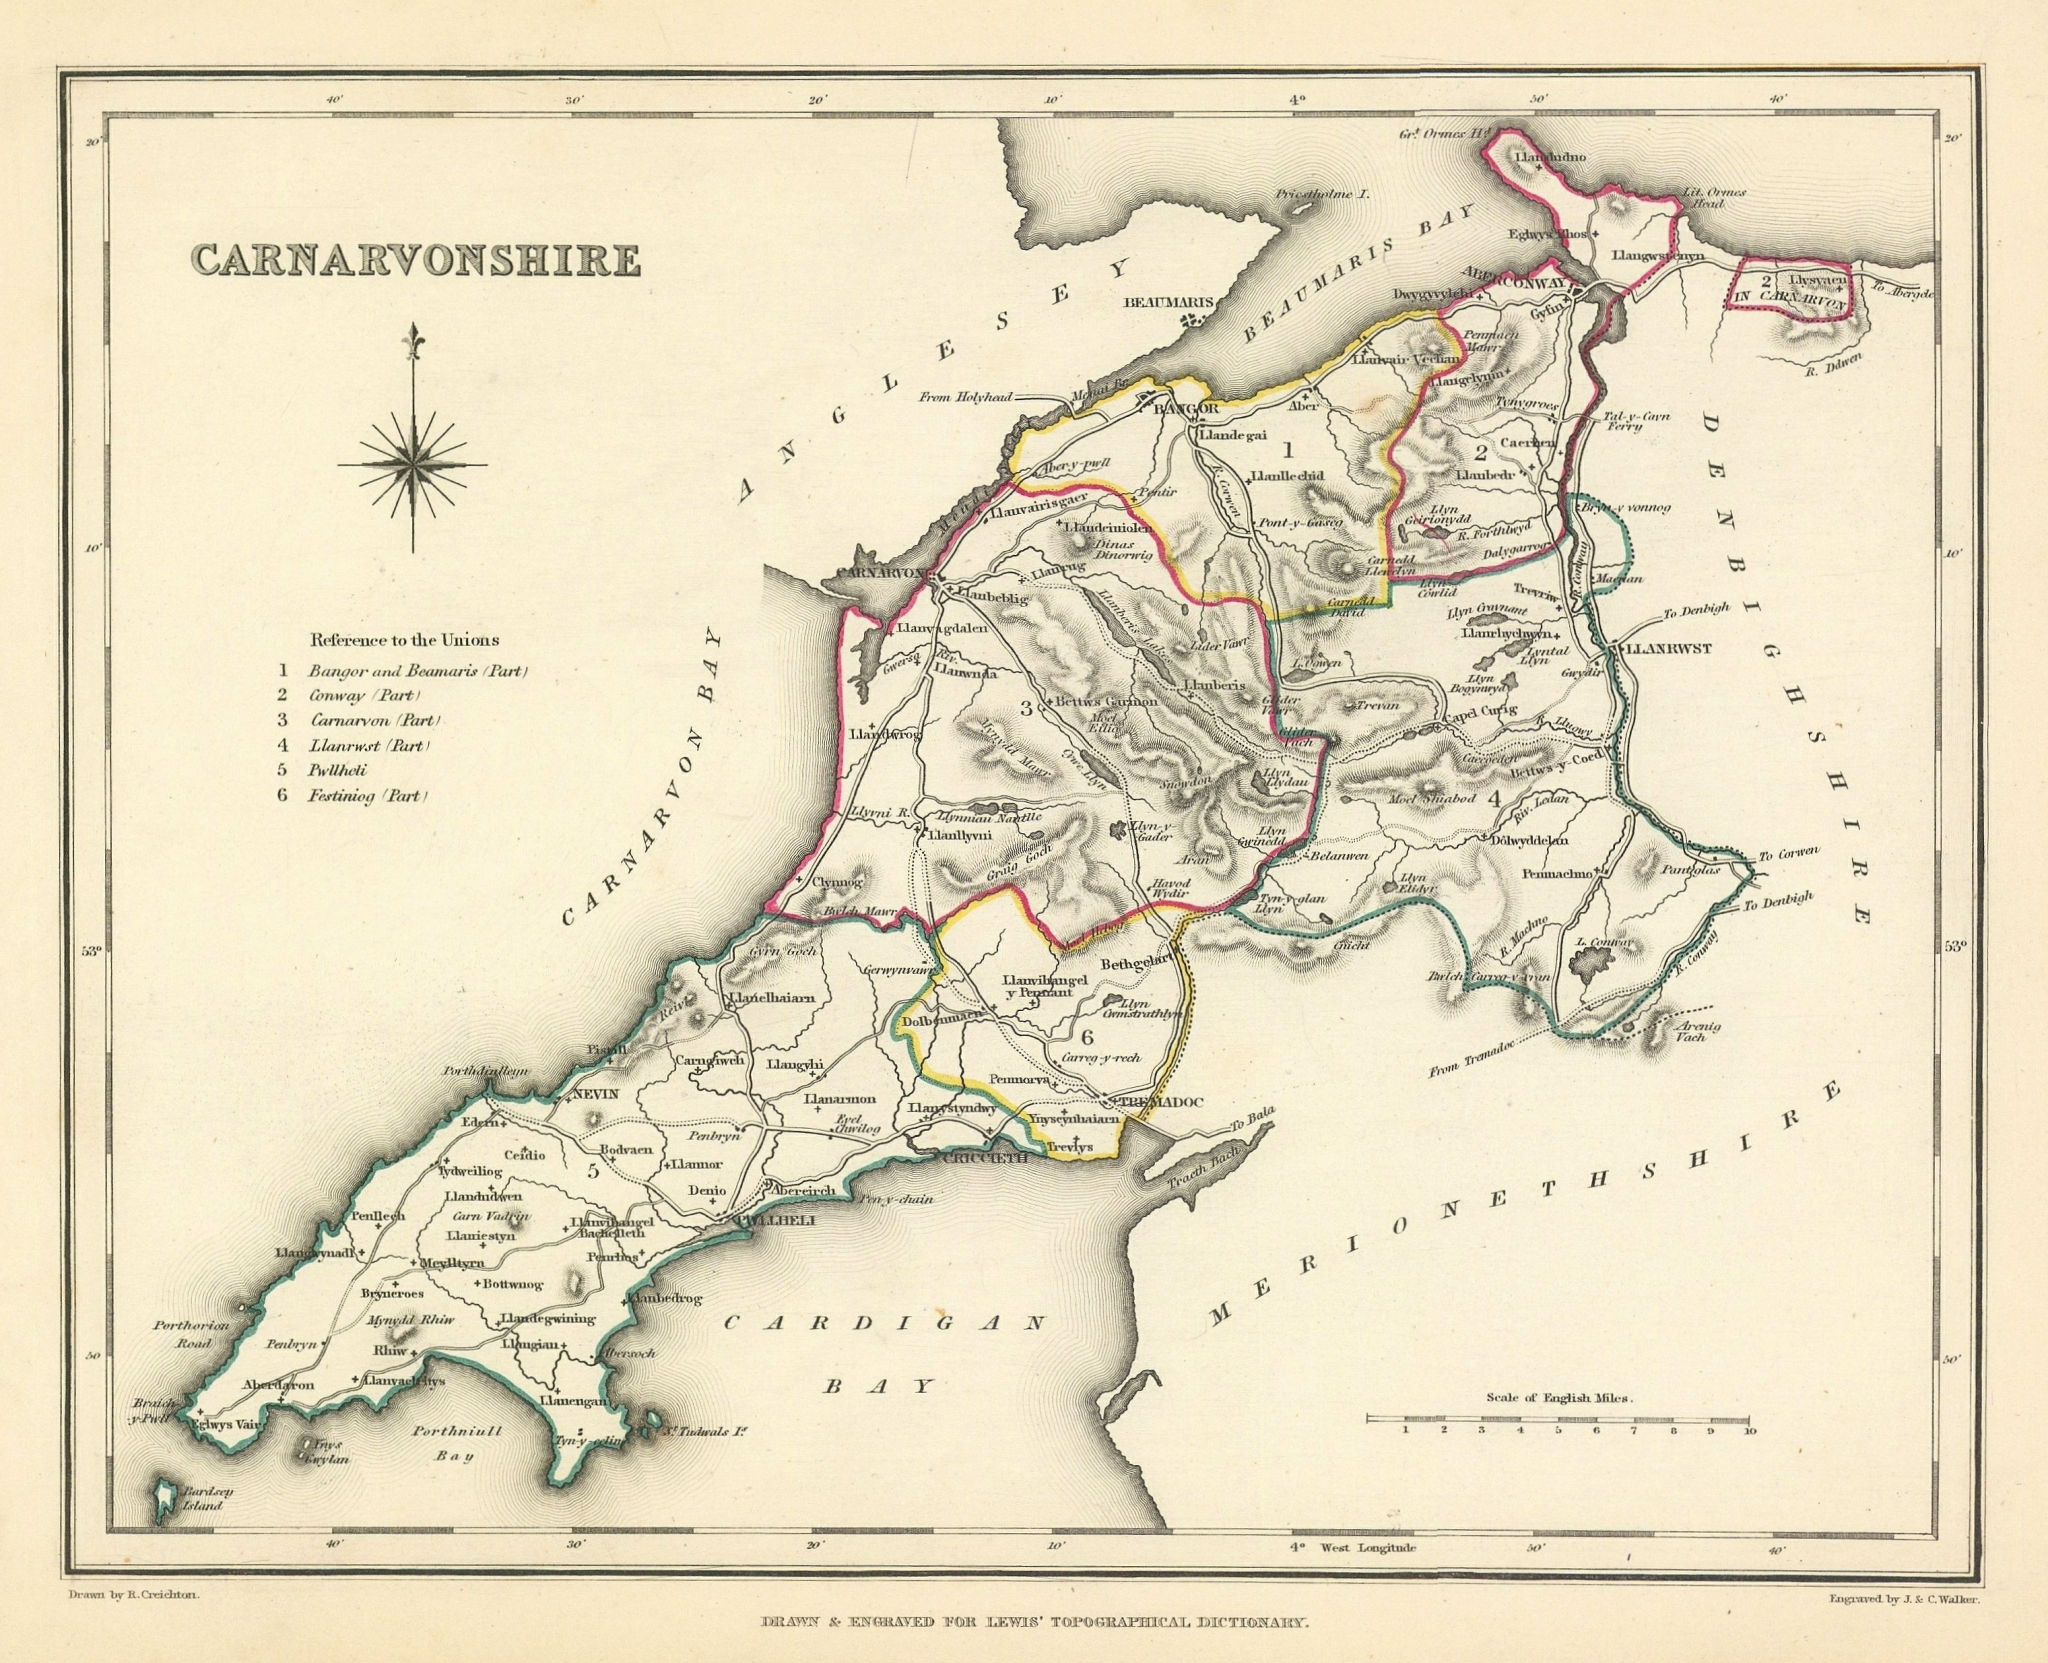 Associate Product Antique county map of CARNARVONSHIRE by Creighton & Walker for Lewis c1840